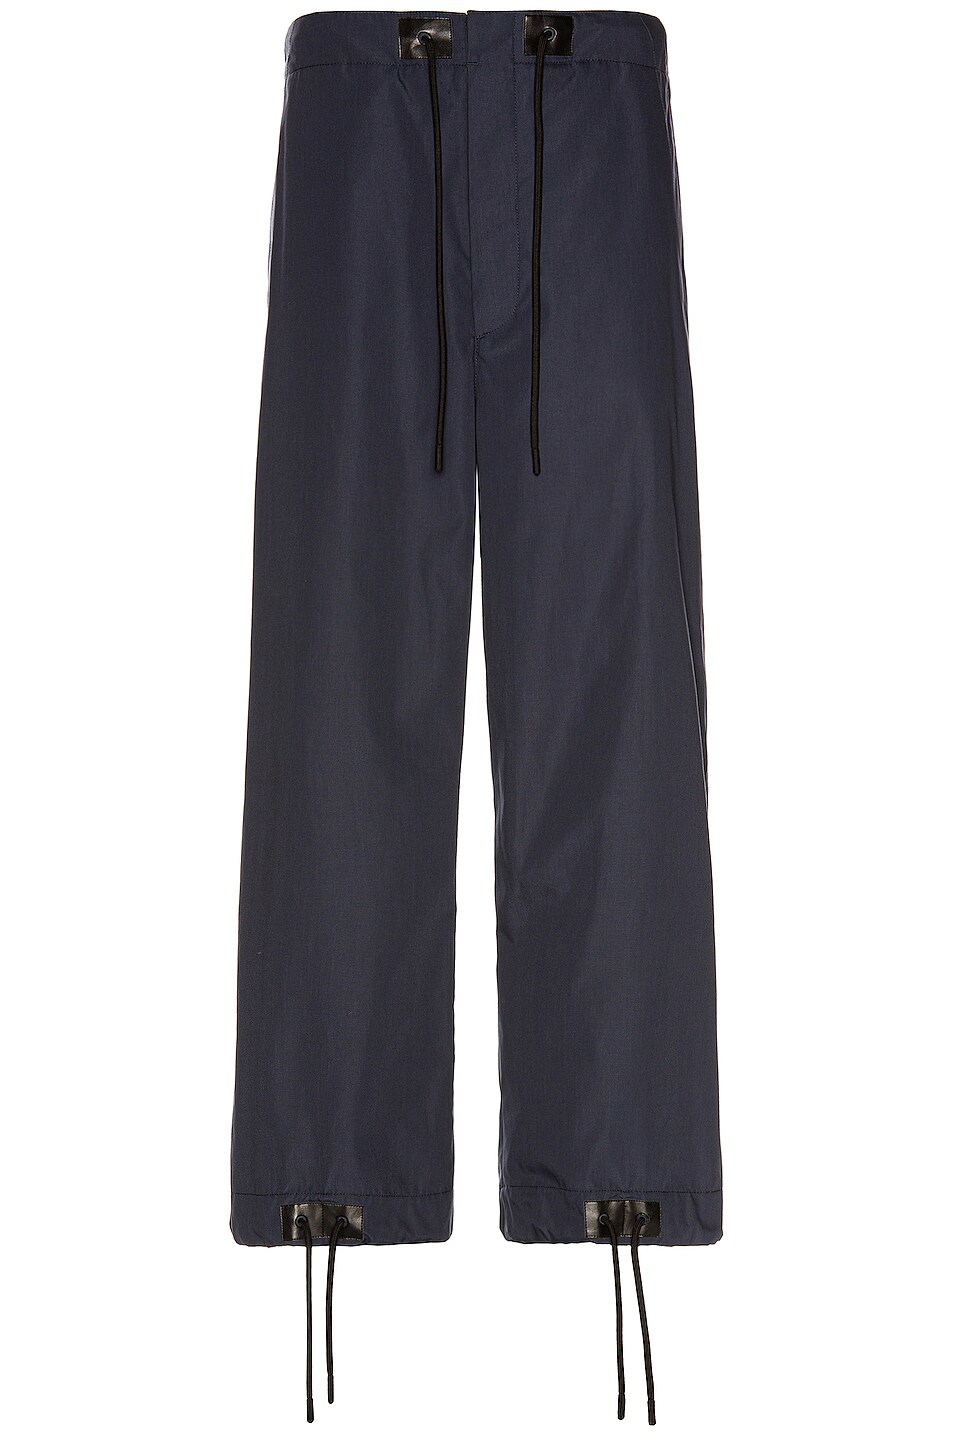 Image 1 of Moncler Genius 1952 Trousers in Black